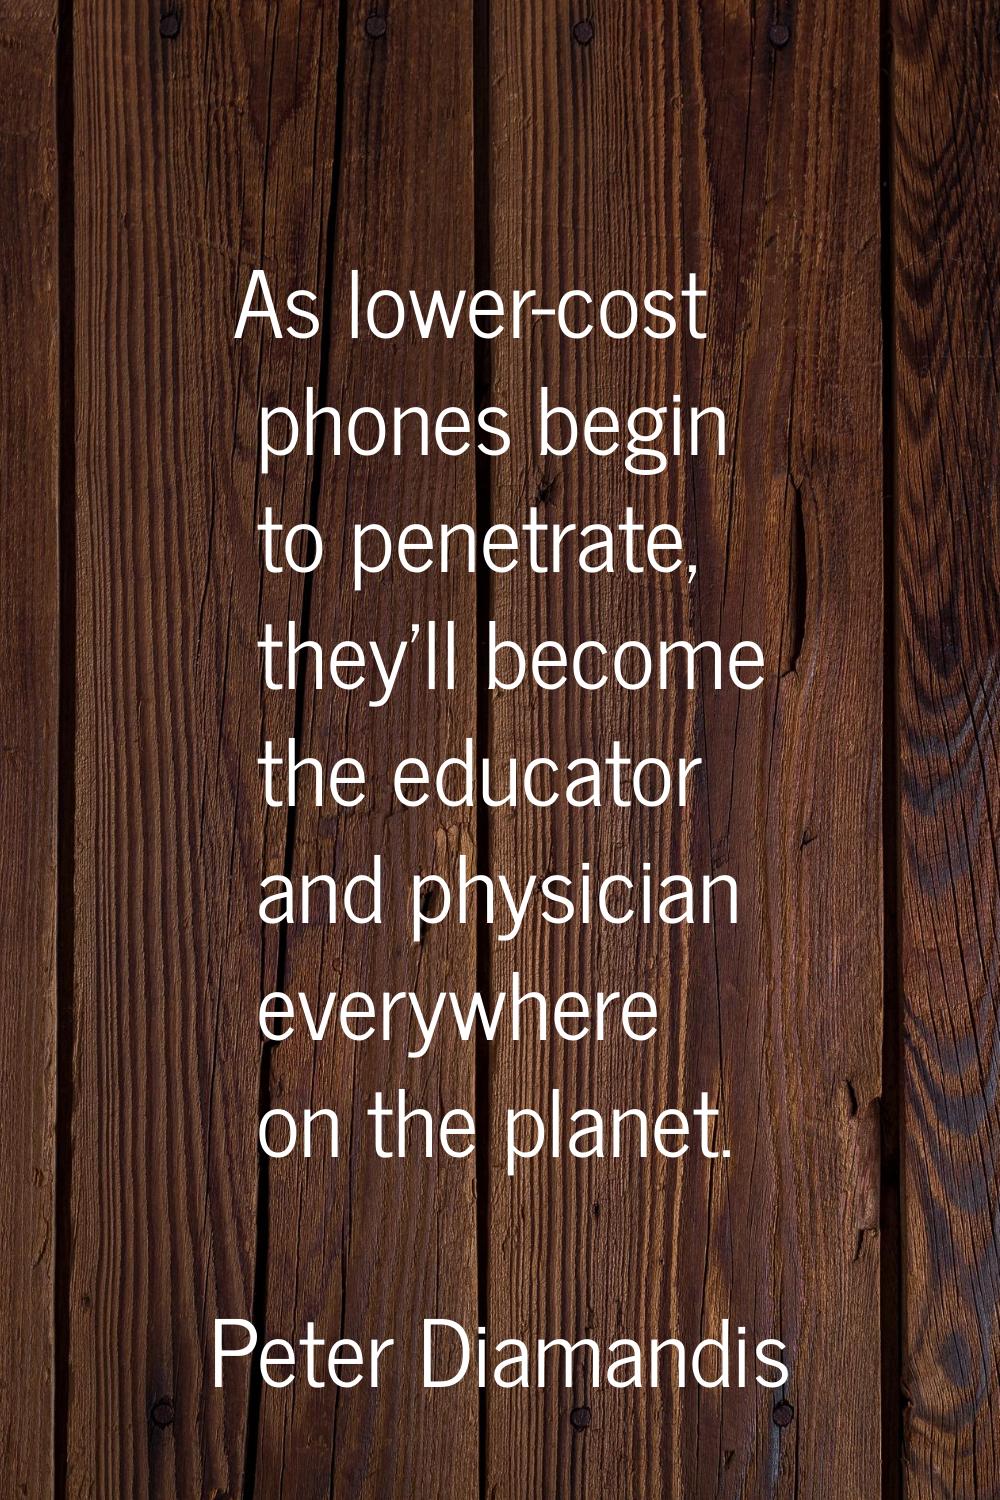 As lower-cost phones begin to penetrate, they'll become the educator and physician everywhere on th